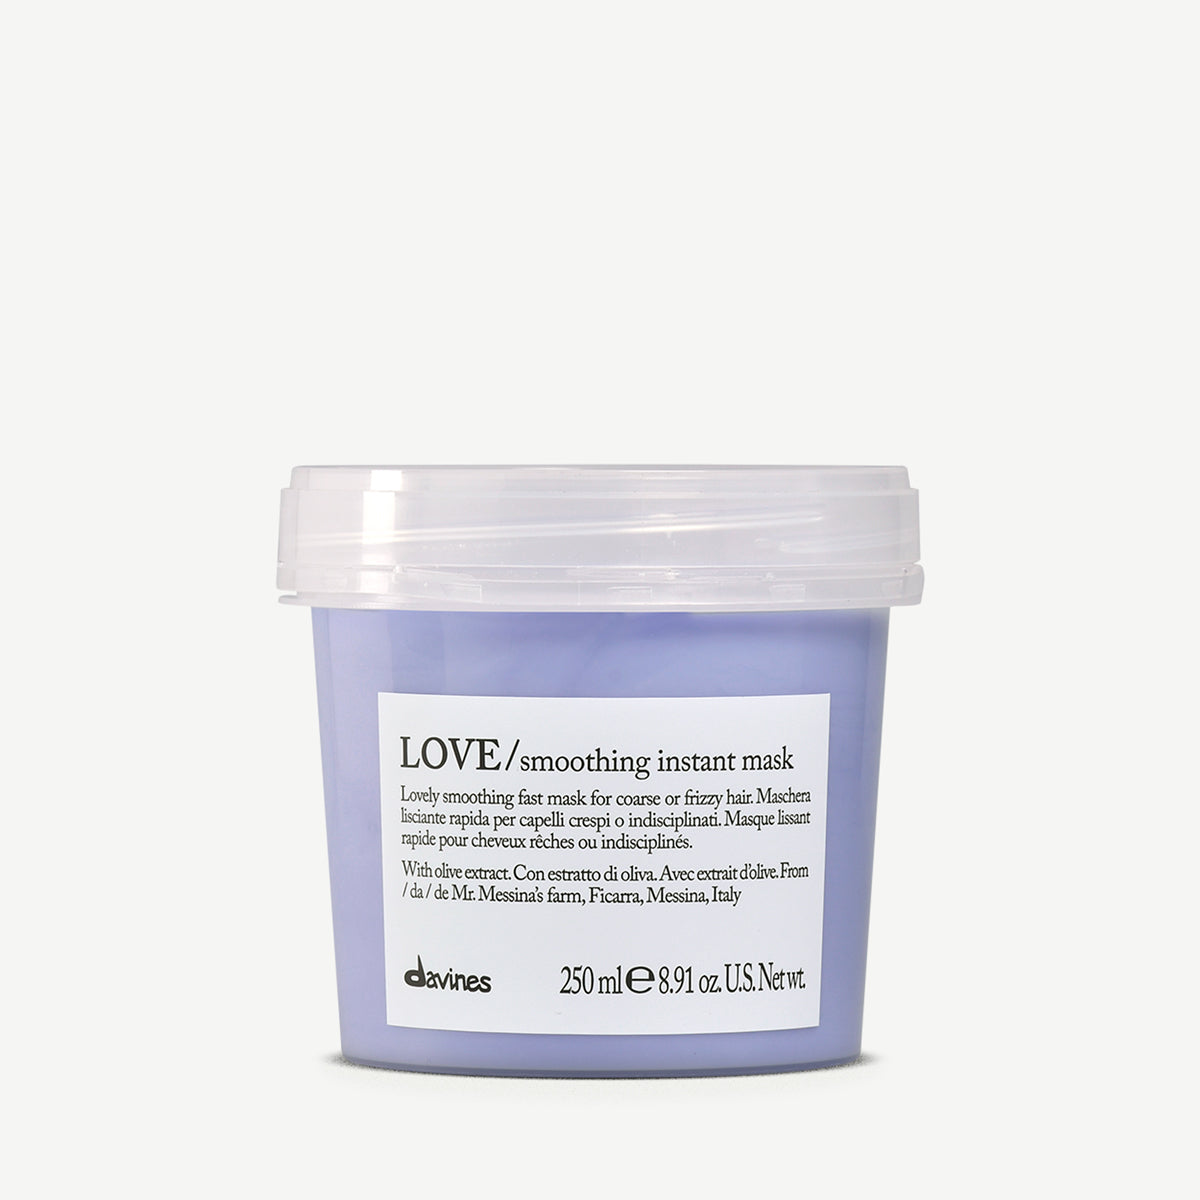 LOVE Smoothing Instant Mask 1  Davines
